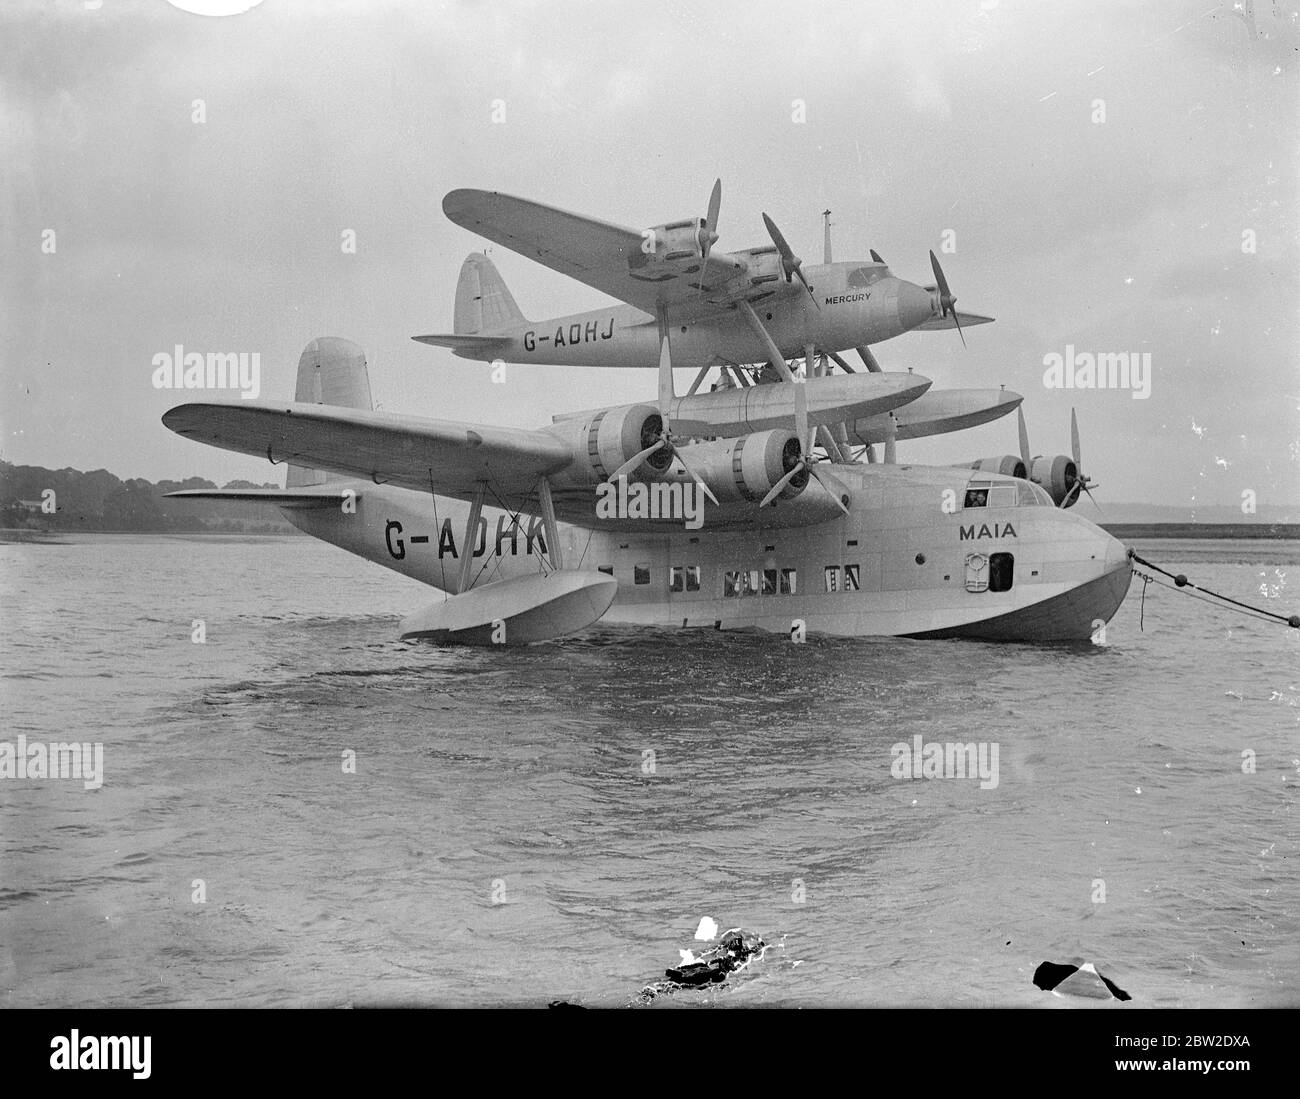 The Short - Mayo Composite , a piggy-back long-range seaplane/flying boat combination , produced by Short Brothers at their works at Rochester, Kent. The smaller aircarft - the Mercury - is placed on top of the Maia flying boat. The plane is expected to bring India and New York within days of no-stop flight . 12 October 1937. Stock Photo